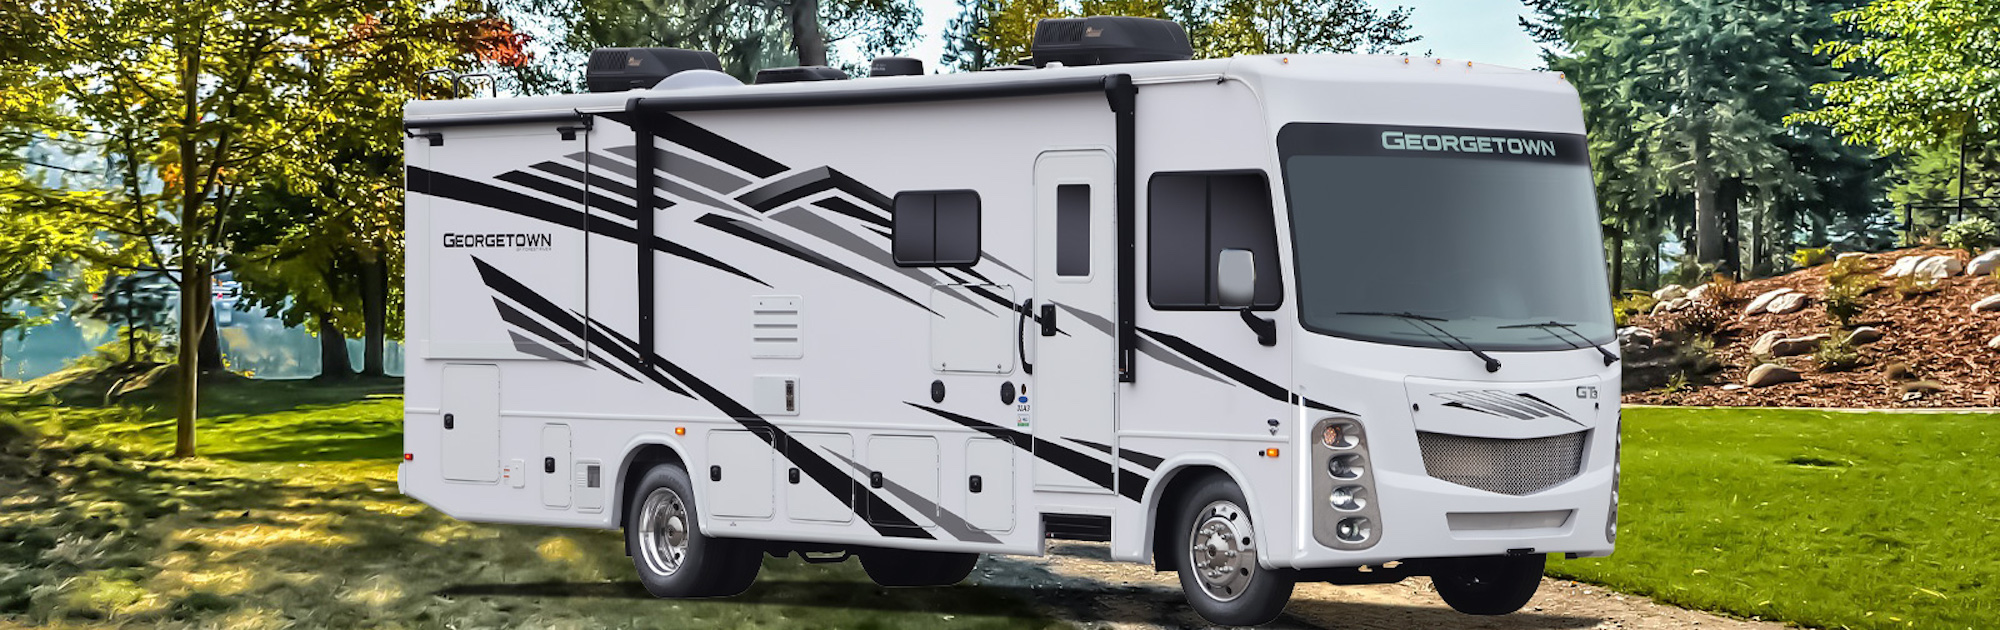 <a href="http://clients.webstager.com/rosmanrv.com/new-forest-river-rvs-in-bc/"><img src="images/upload/January_2022/0-Forest-River-Georgetown-Class-A-Motorhome-Penticton-BC.jpeg"alt="An exterior image of a 2022 Forest River Georgetown Class A Motorhome parked on a grassy campsite with trees, rocks and mulch-covered hills in the background"/></a>